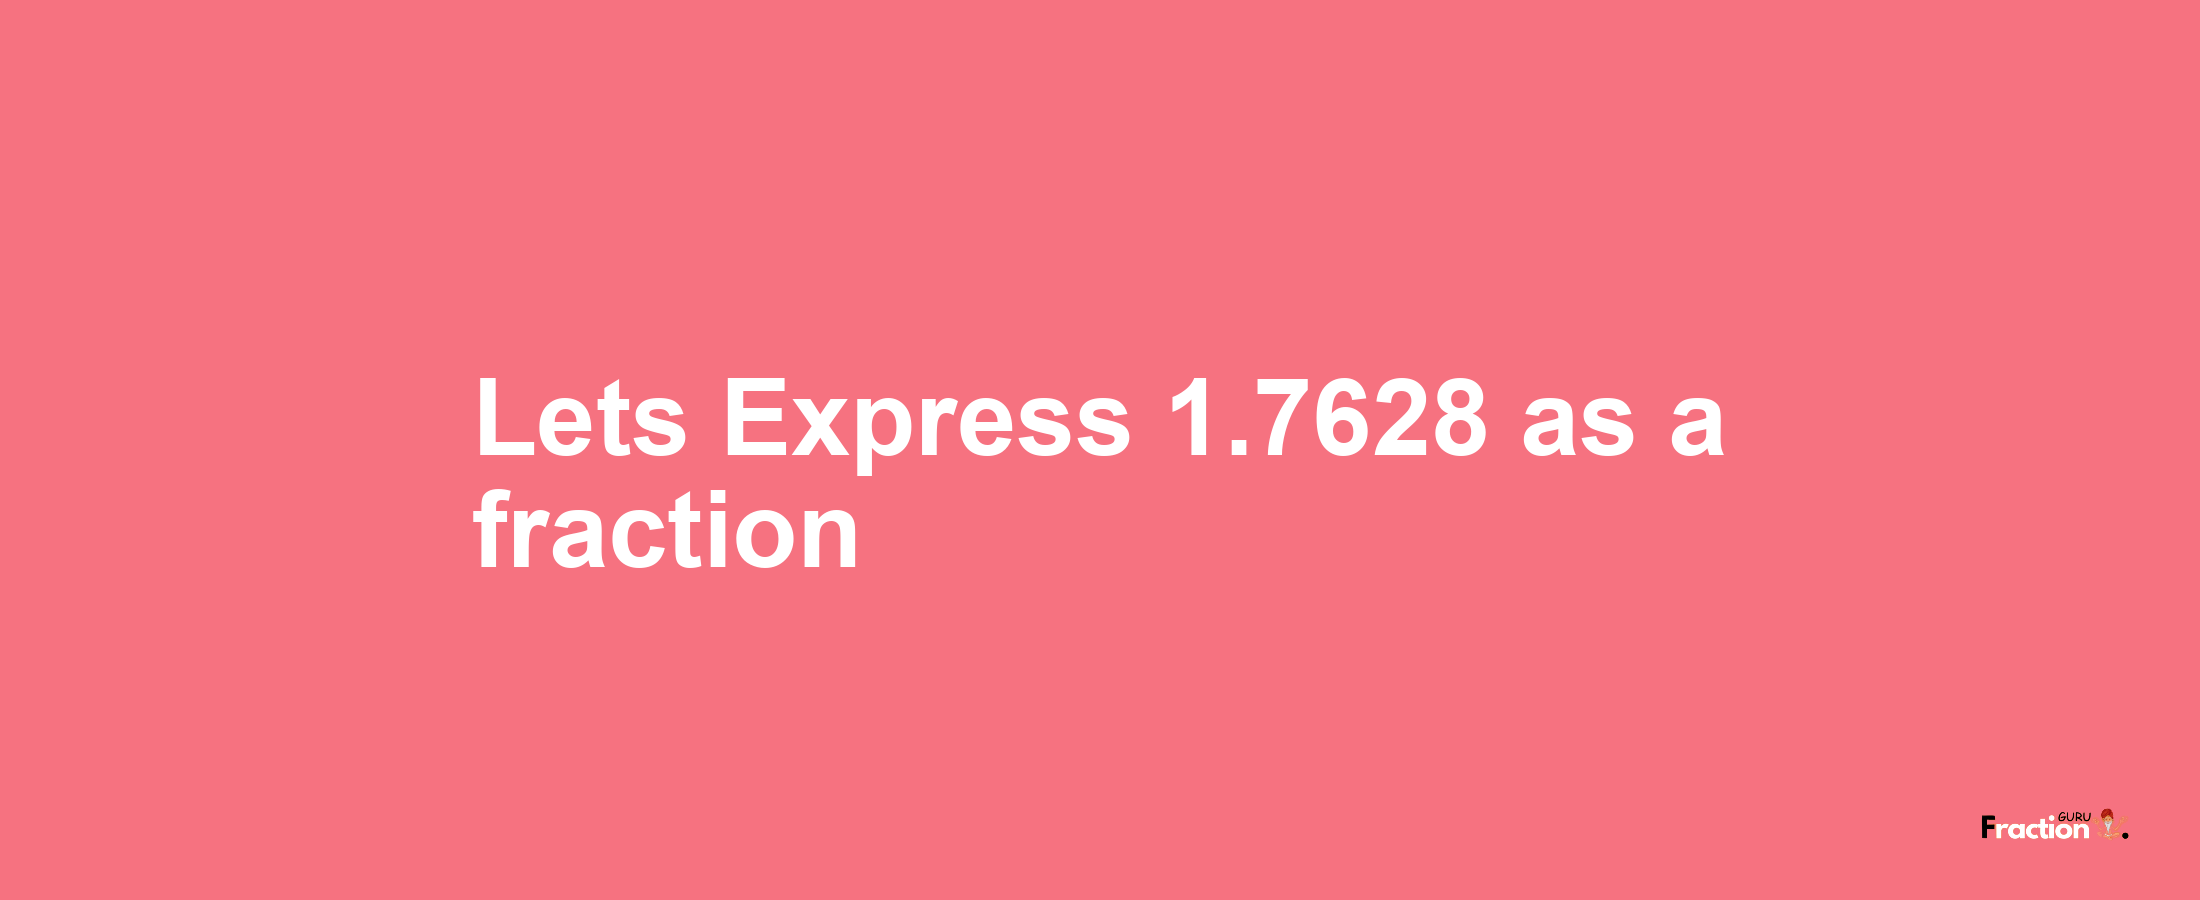 Lets Express 1.7628 as afraction